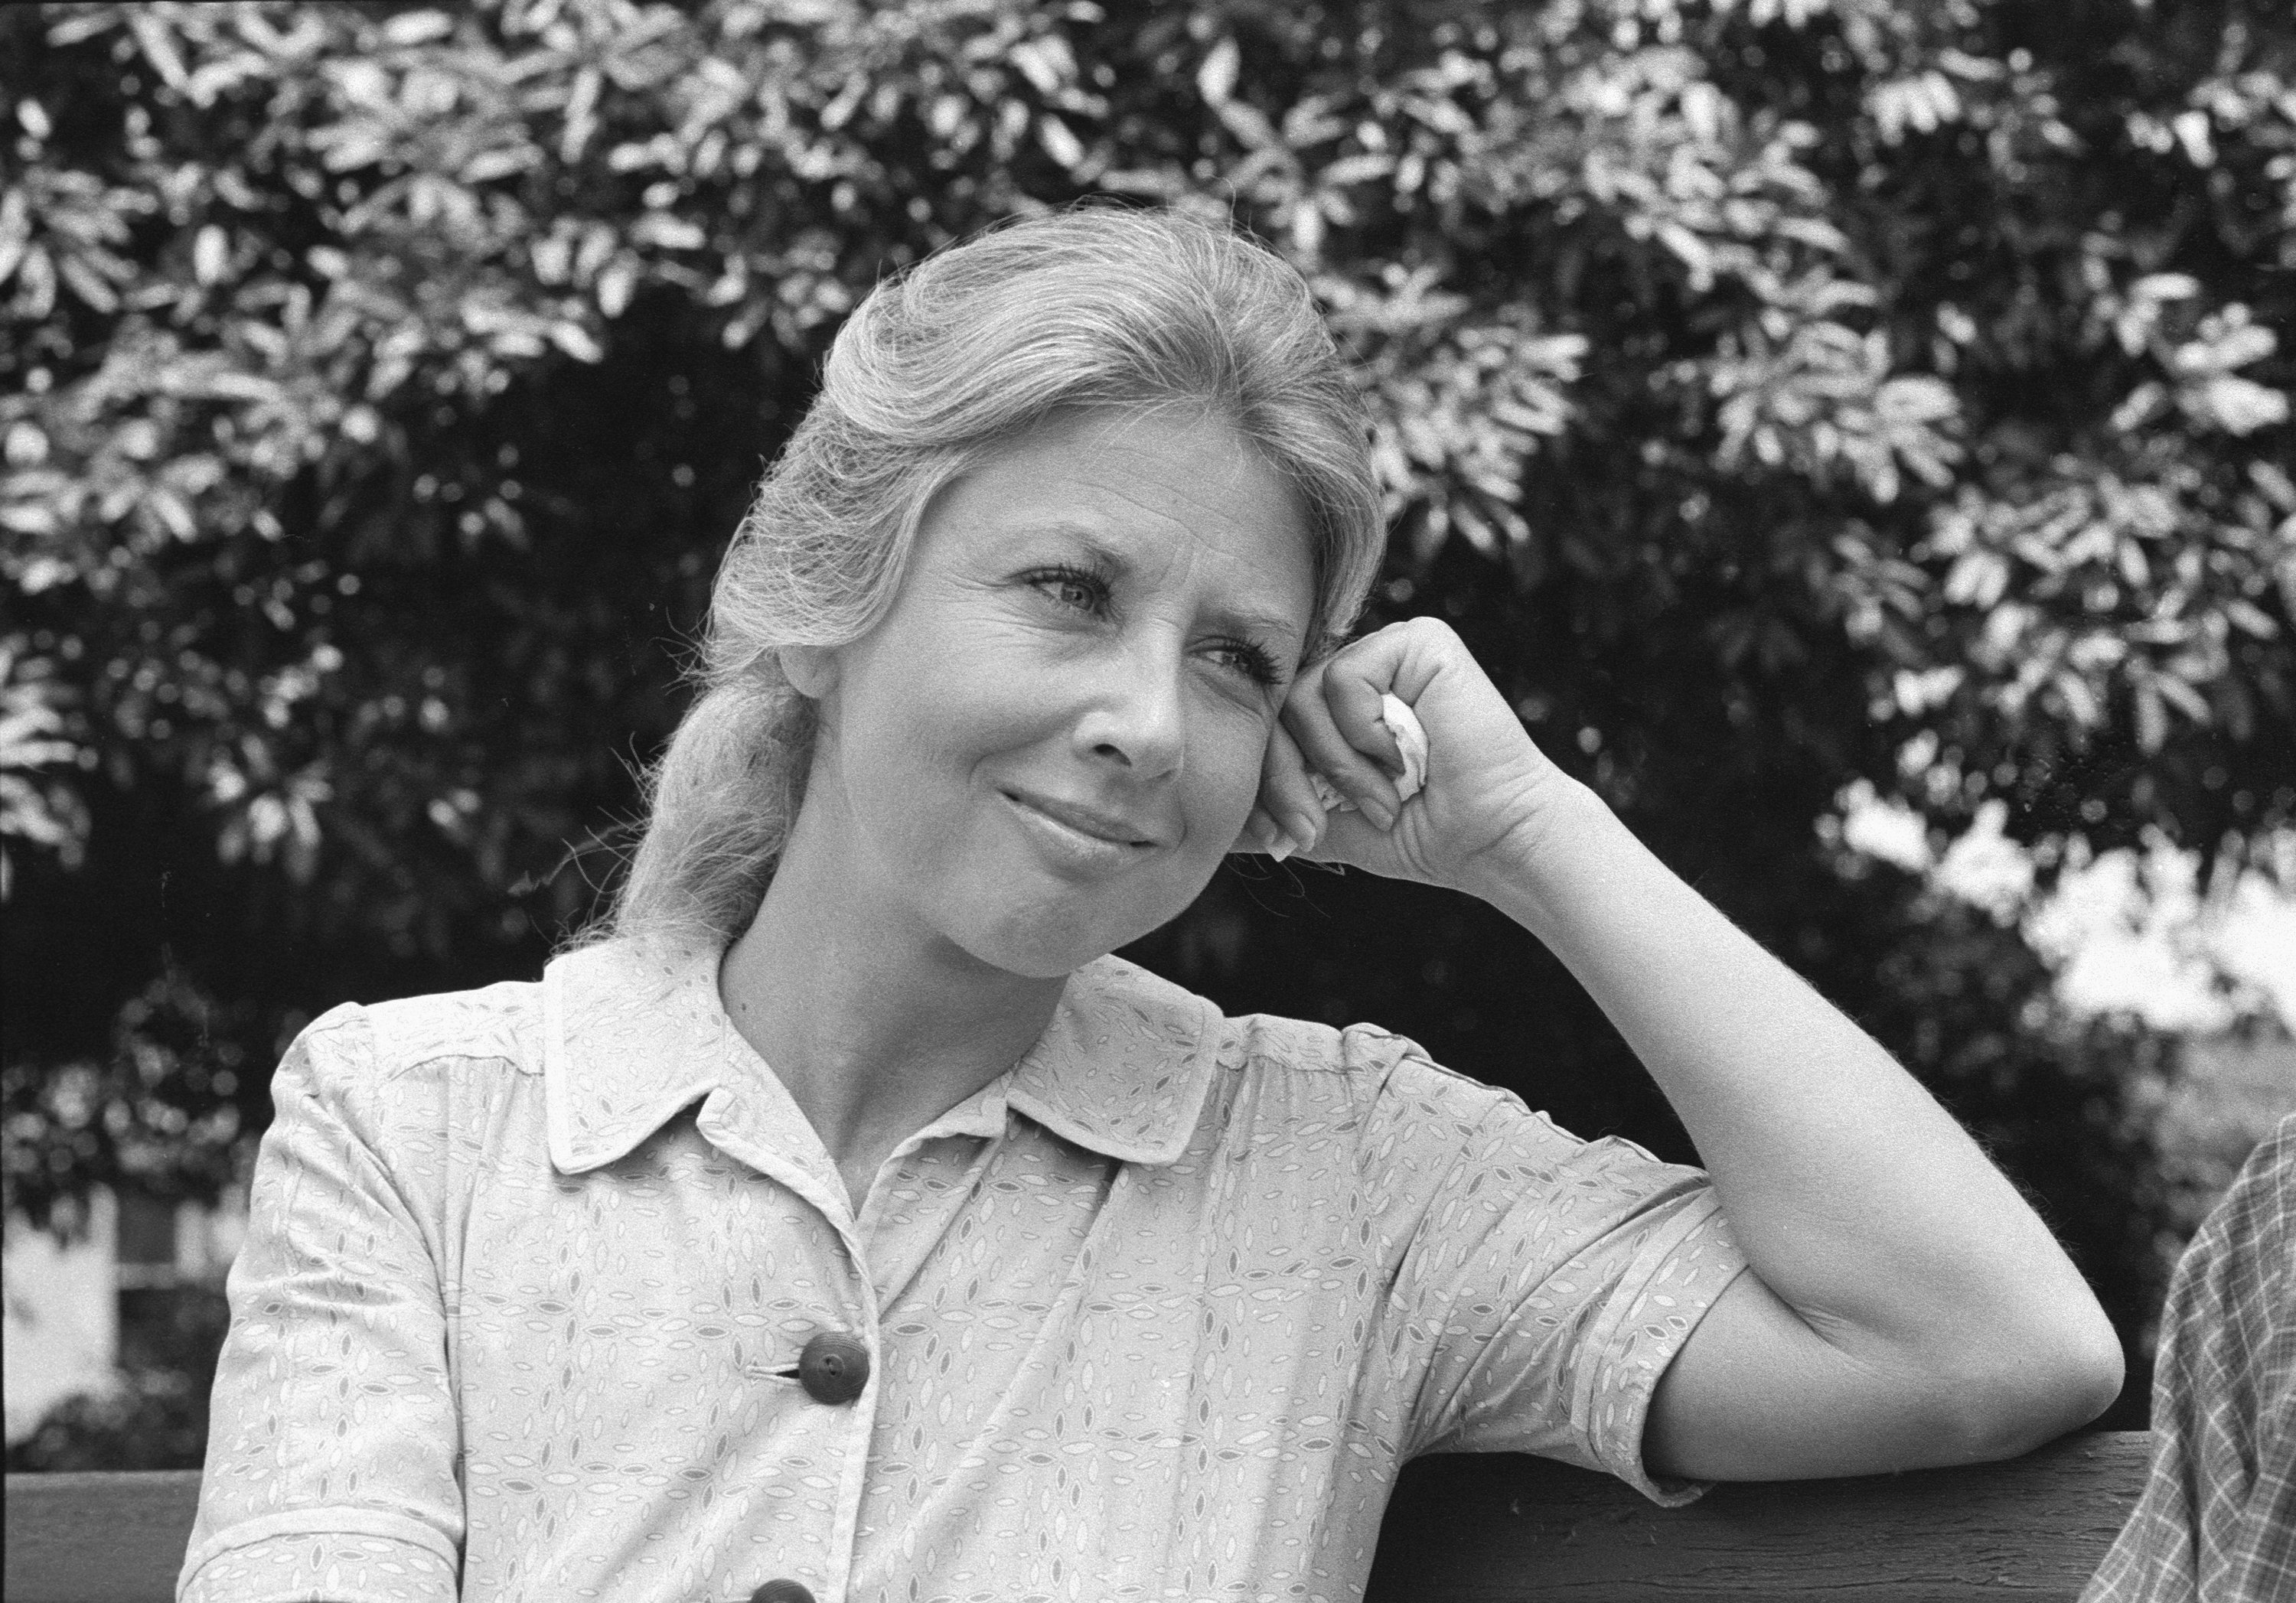 Michael Learned as Olivia Walton in "The Waltons" on "The Empty Nest" episode on June 16, 1978 ┃Source: Getty Images